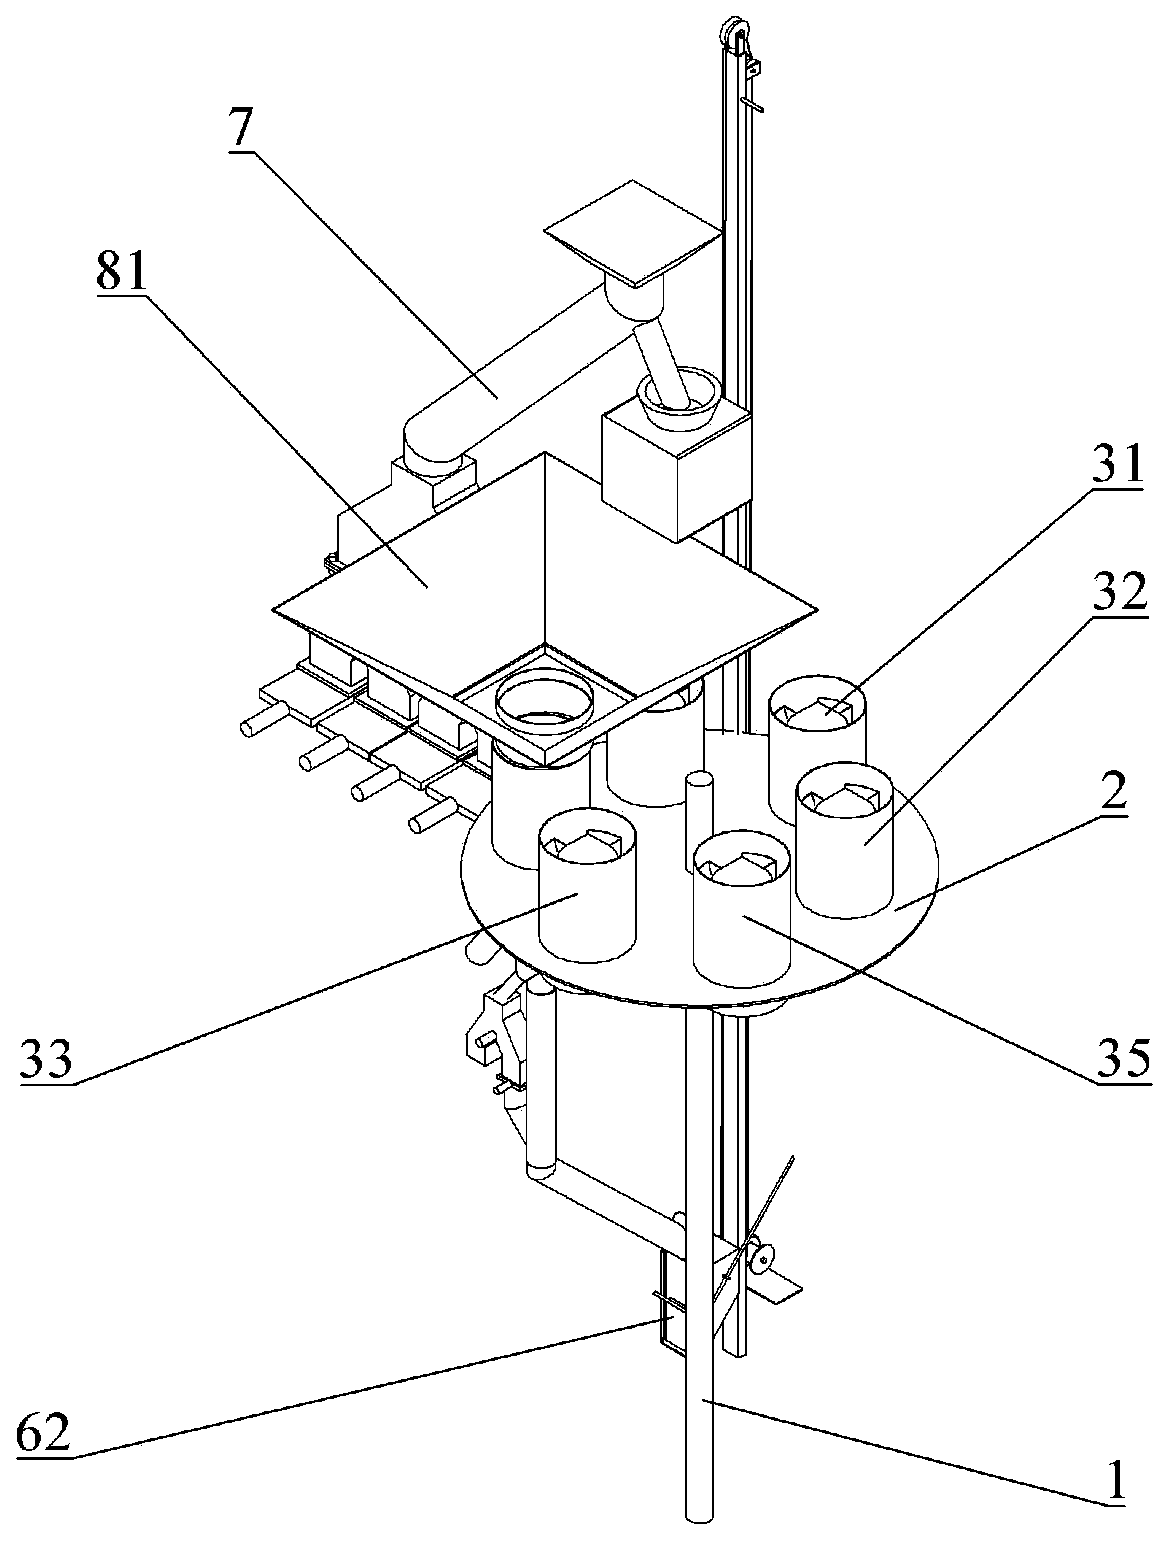 Material sample division device and method